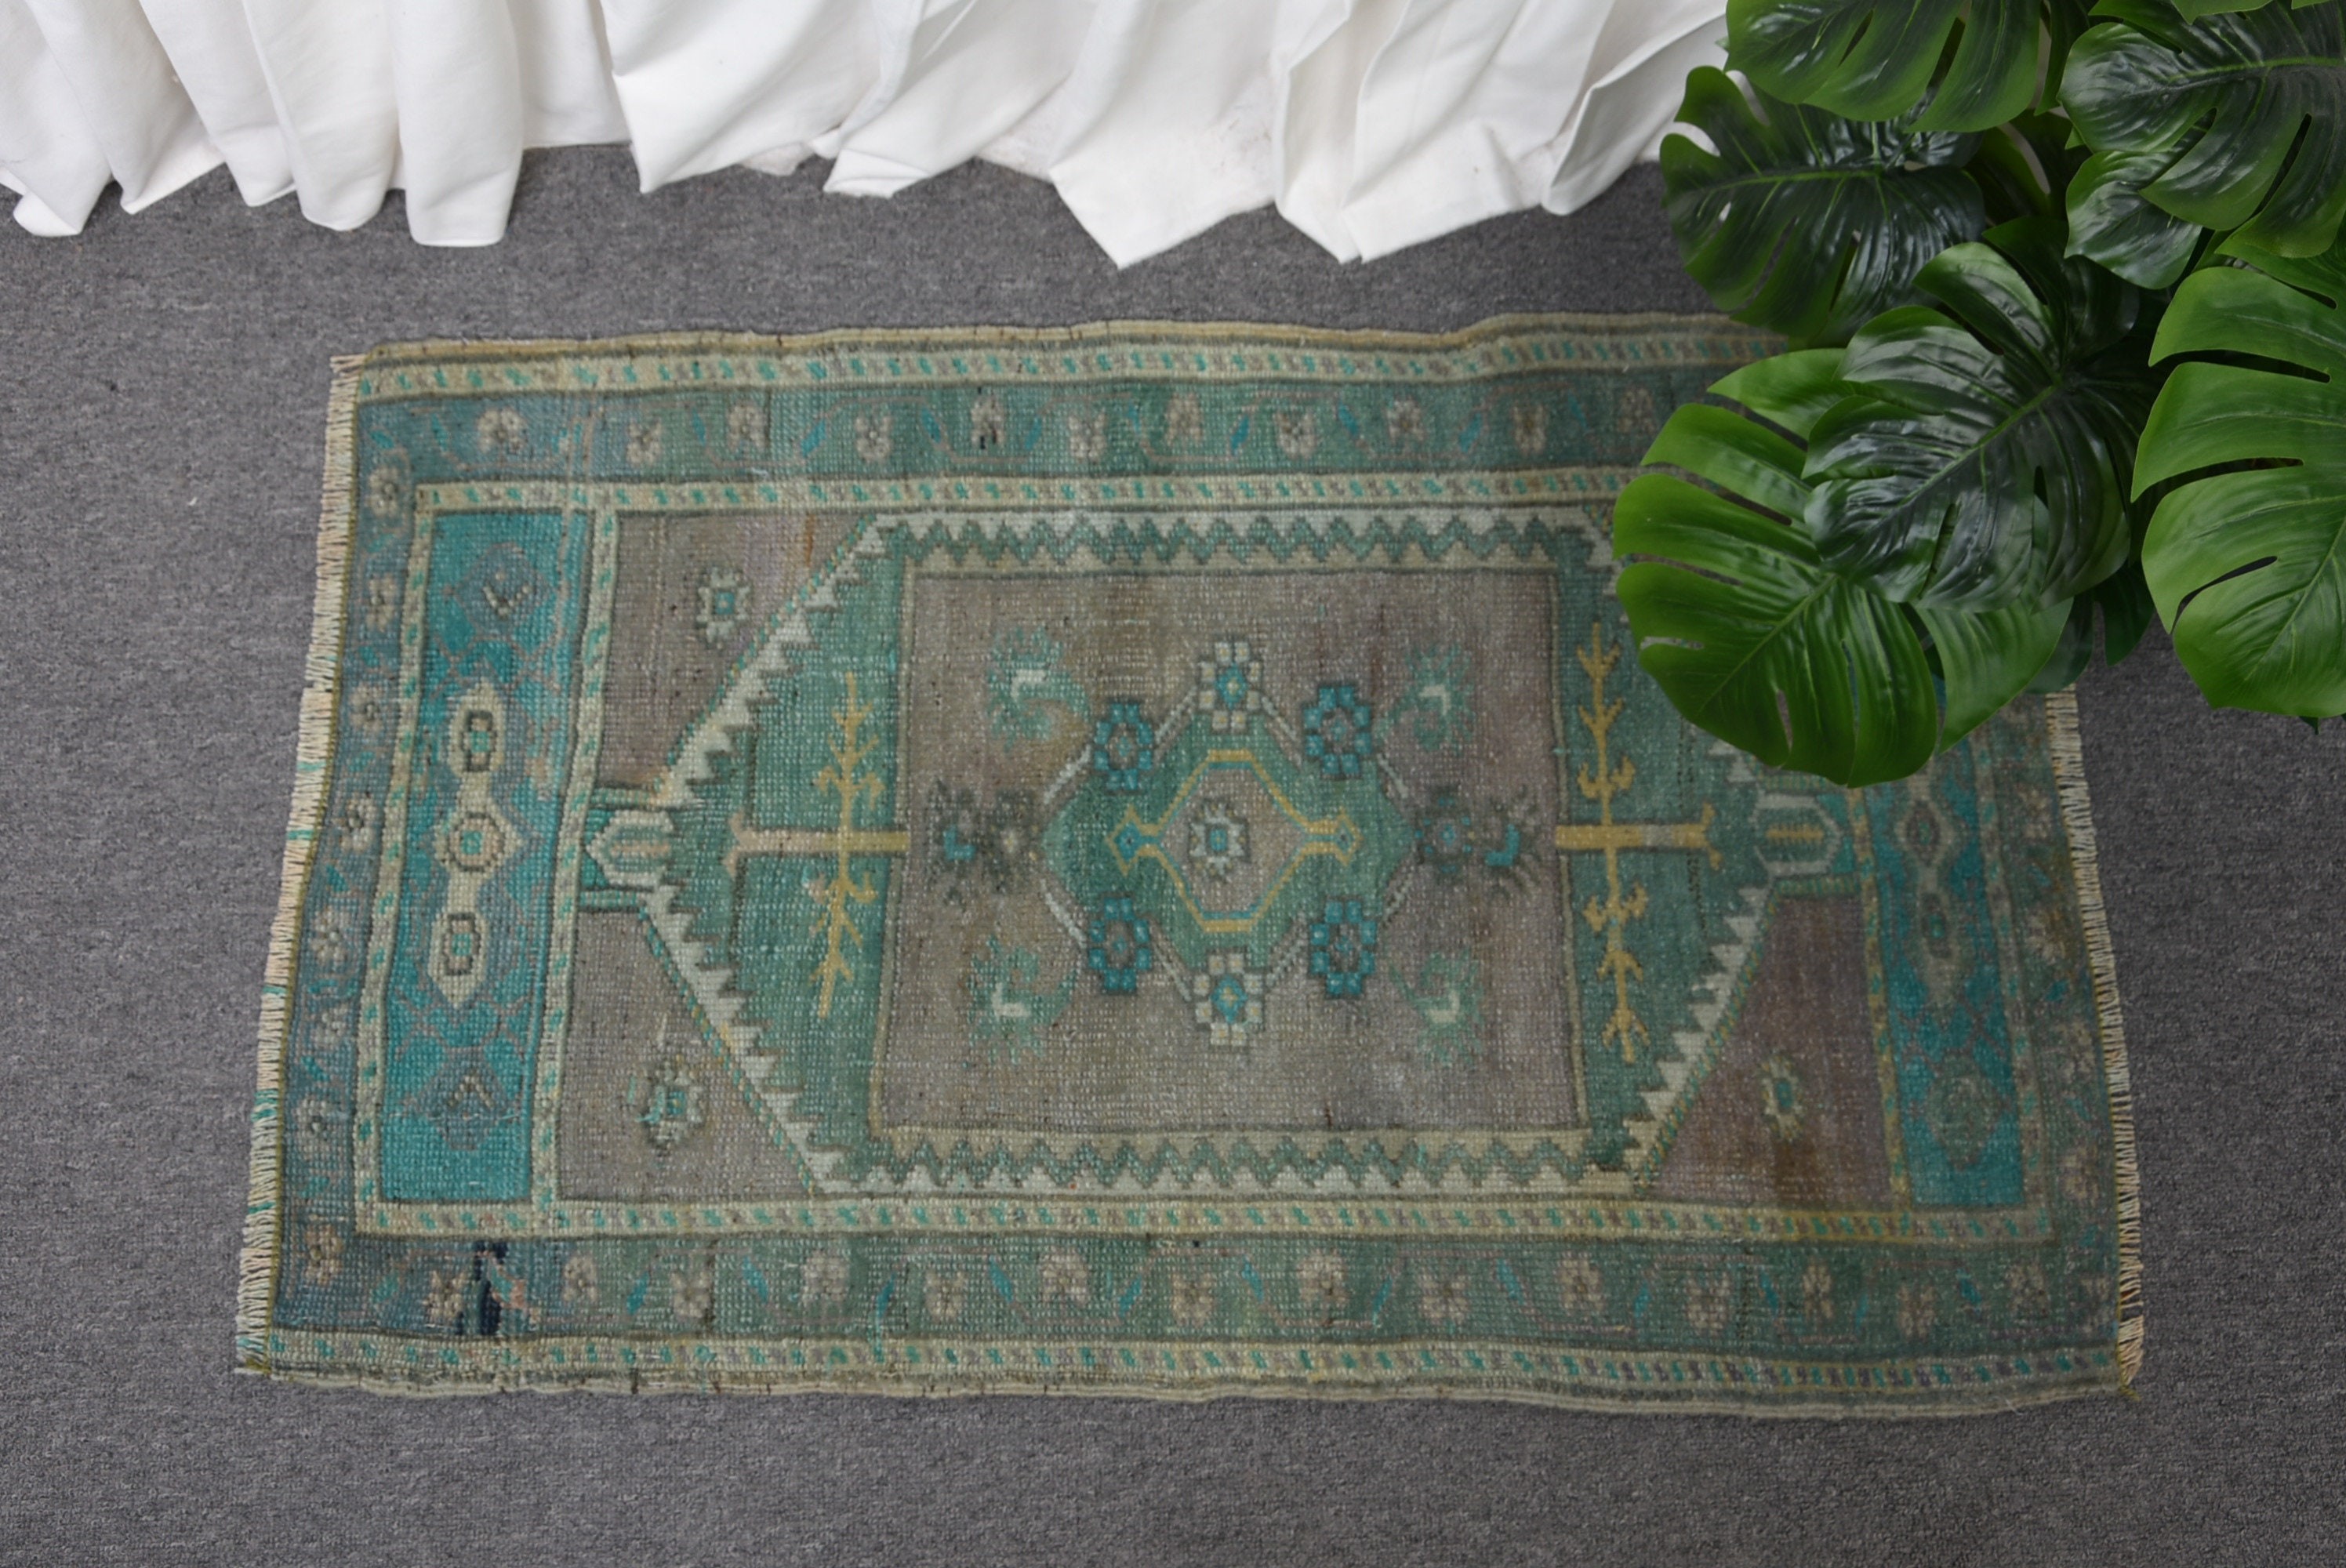 Vintage Rugs, Anatolian Rugs, Nursery Rug, Entry Rug, 1.8x3 ft Small Rug, Rugs for Kitchen, Turkish Rugs, Green Oushak Rug